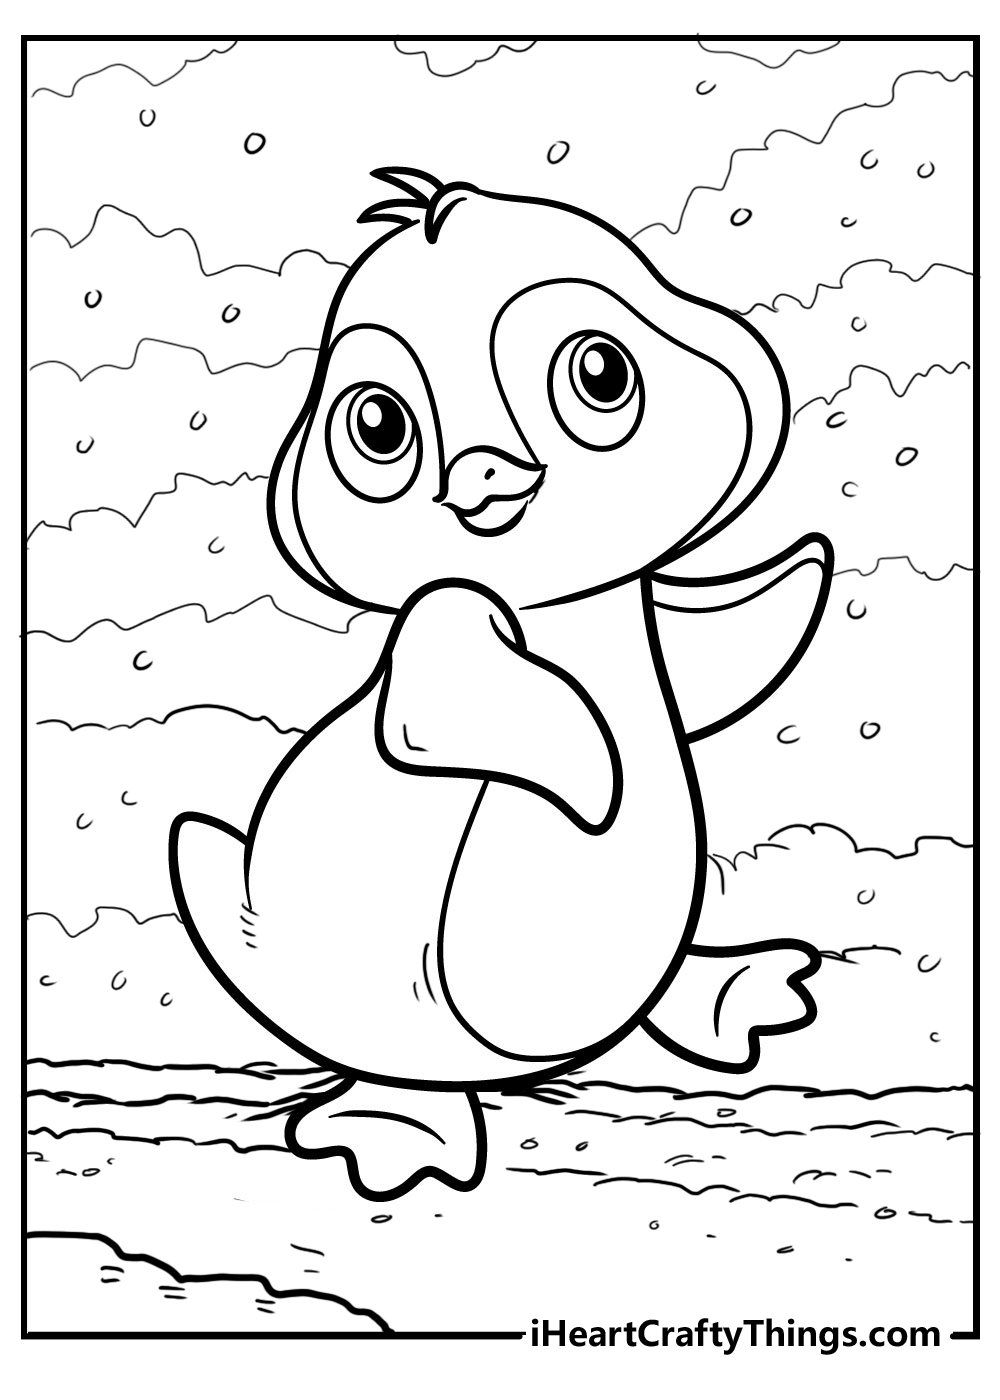 penguin coloring pages free download